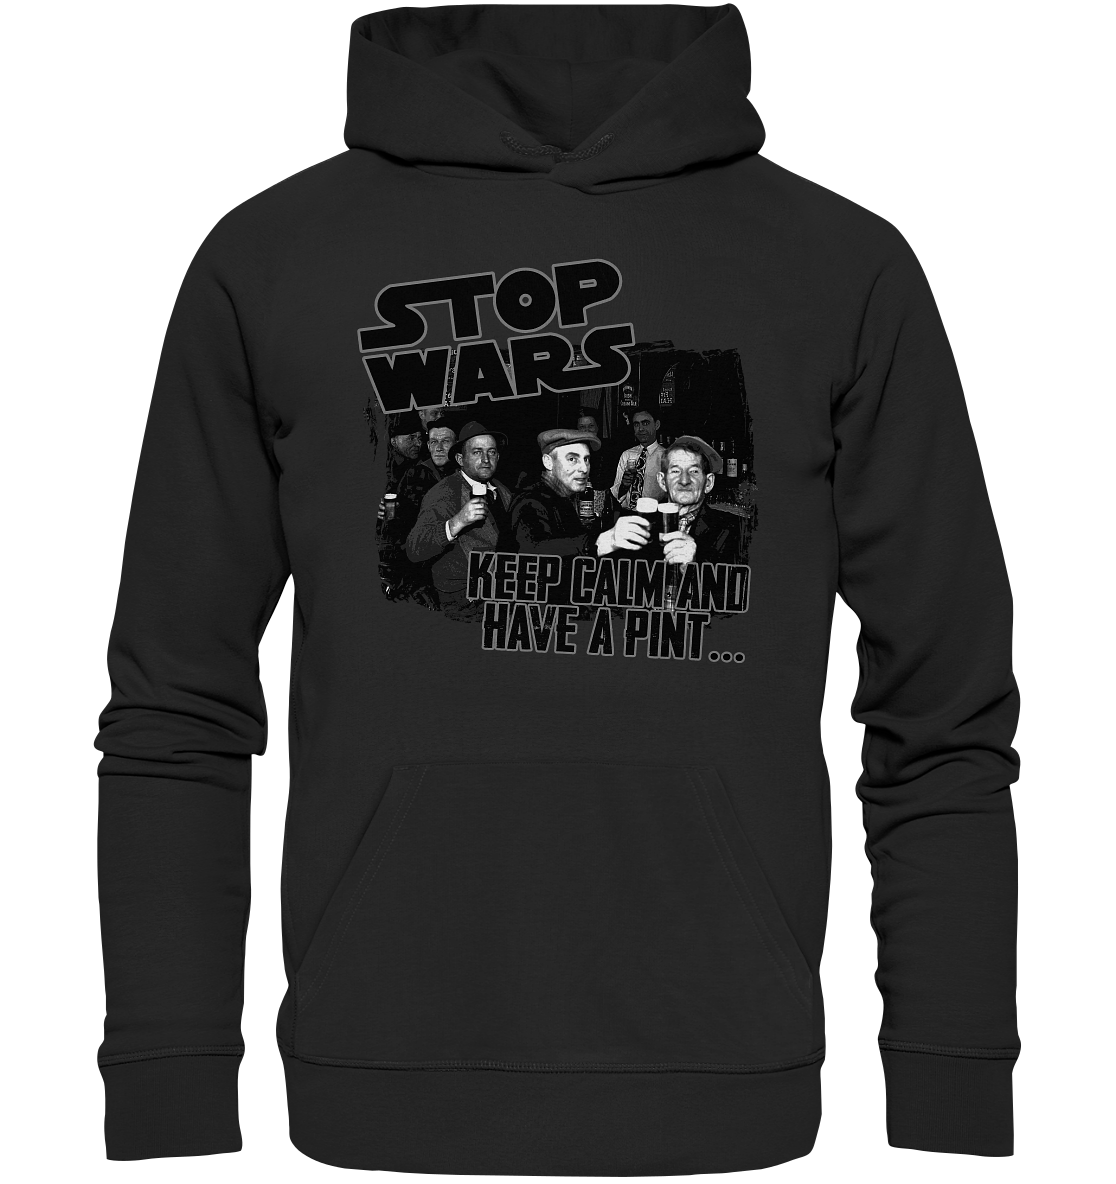 Stop Wars "Keep Calm And Have A Pint" - Premium Unisex Hoodie